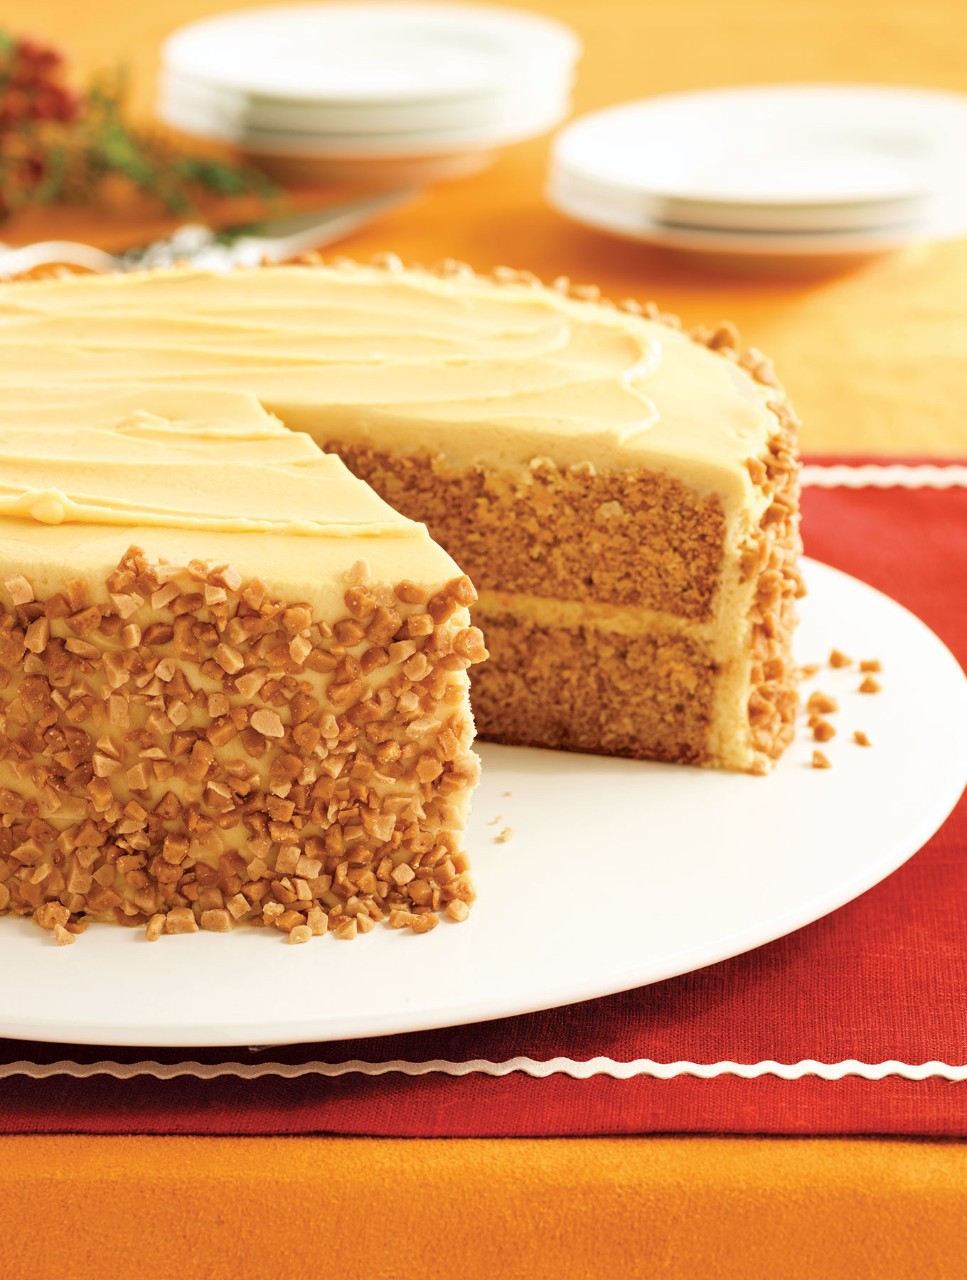 Spice Cake with Dulce de Leche Icing and Toffee